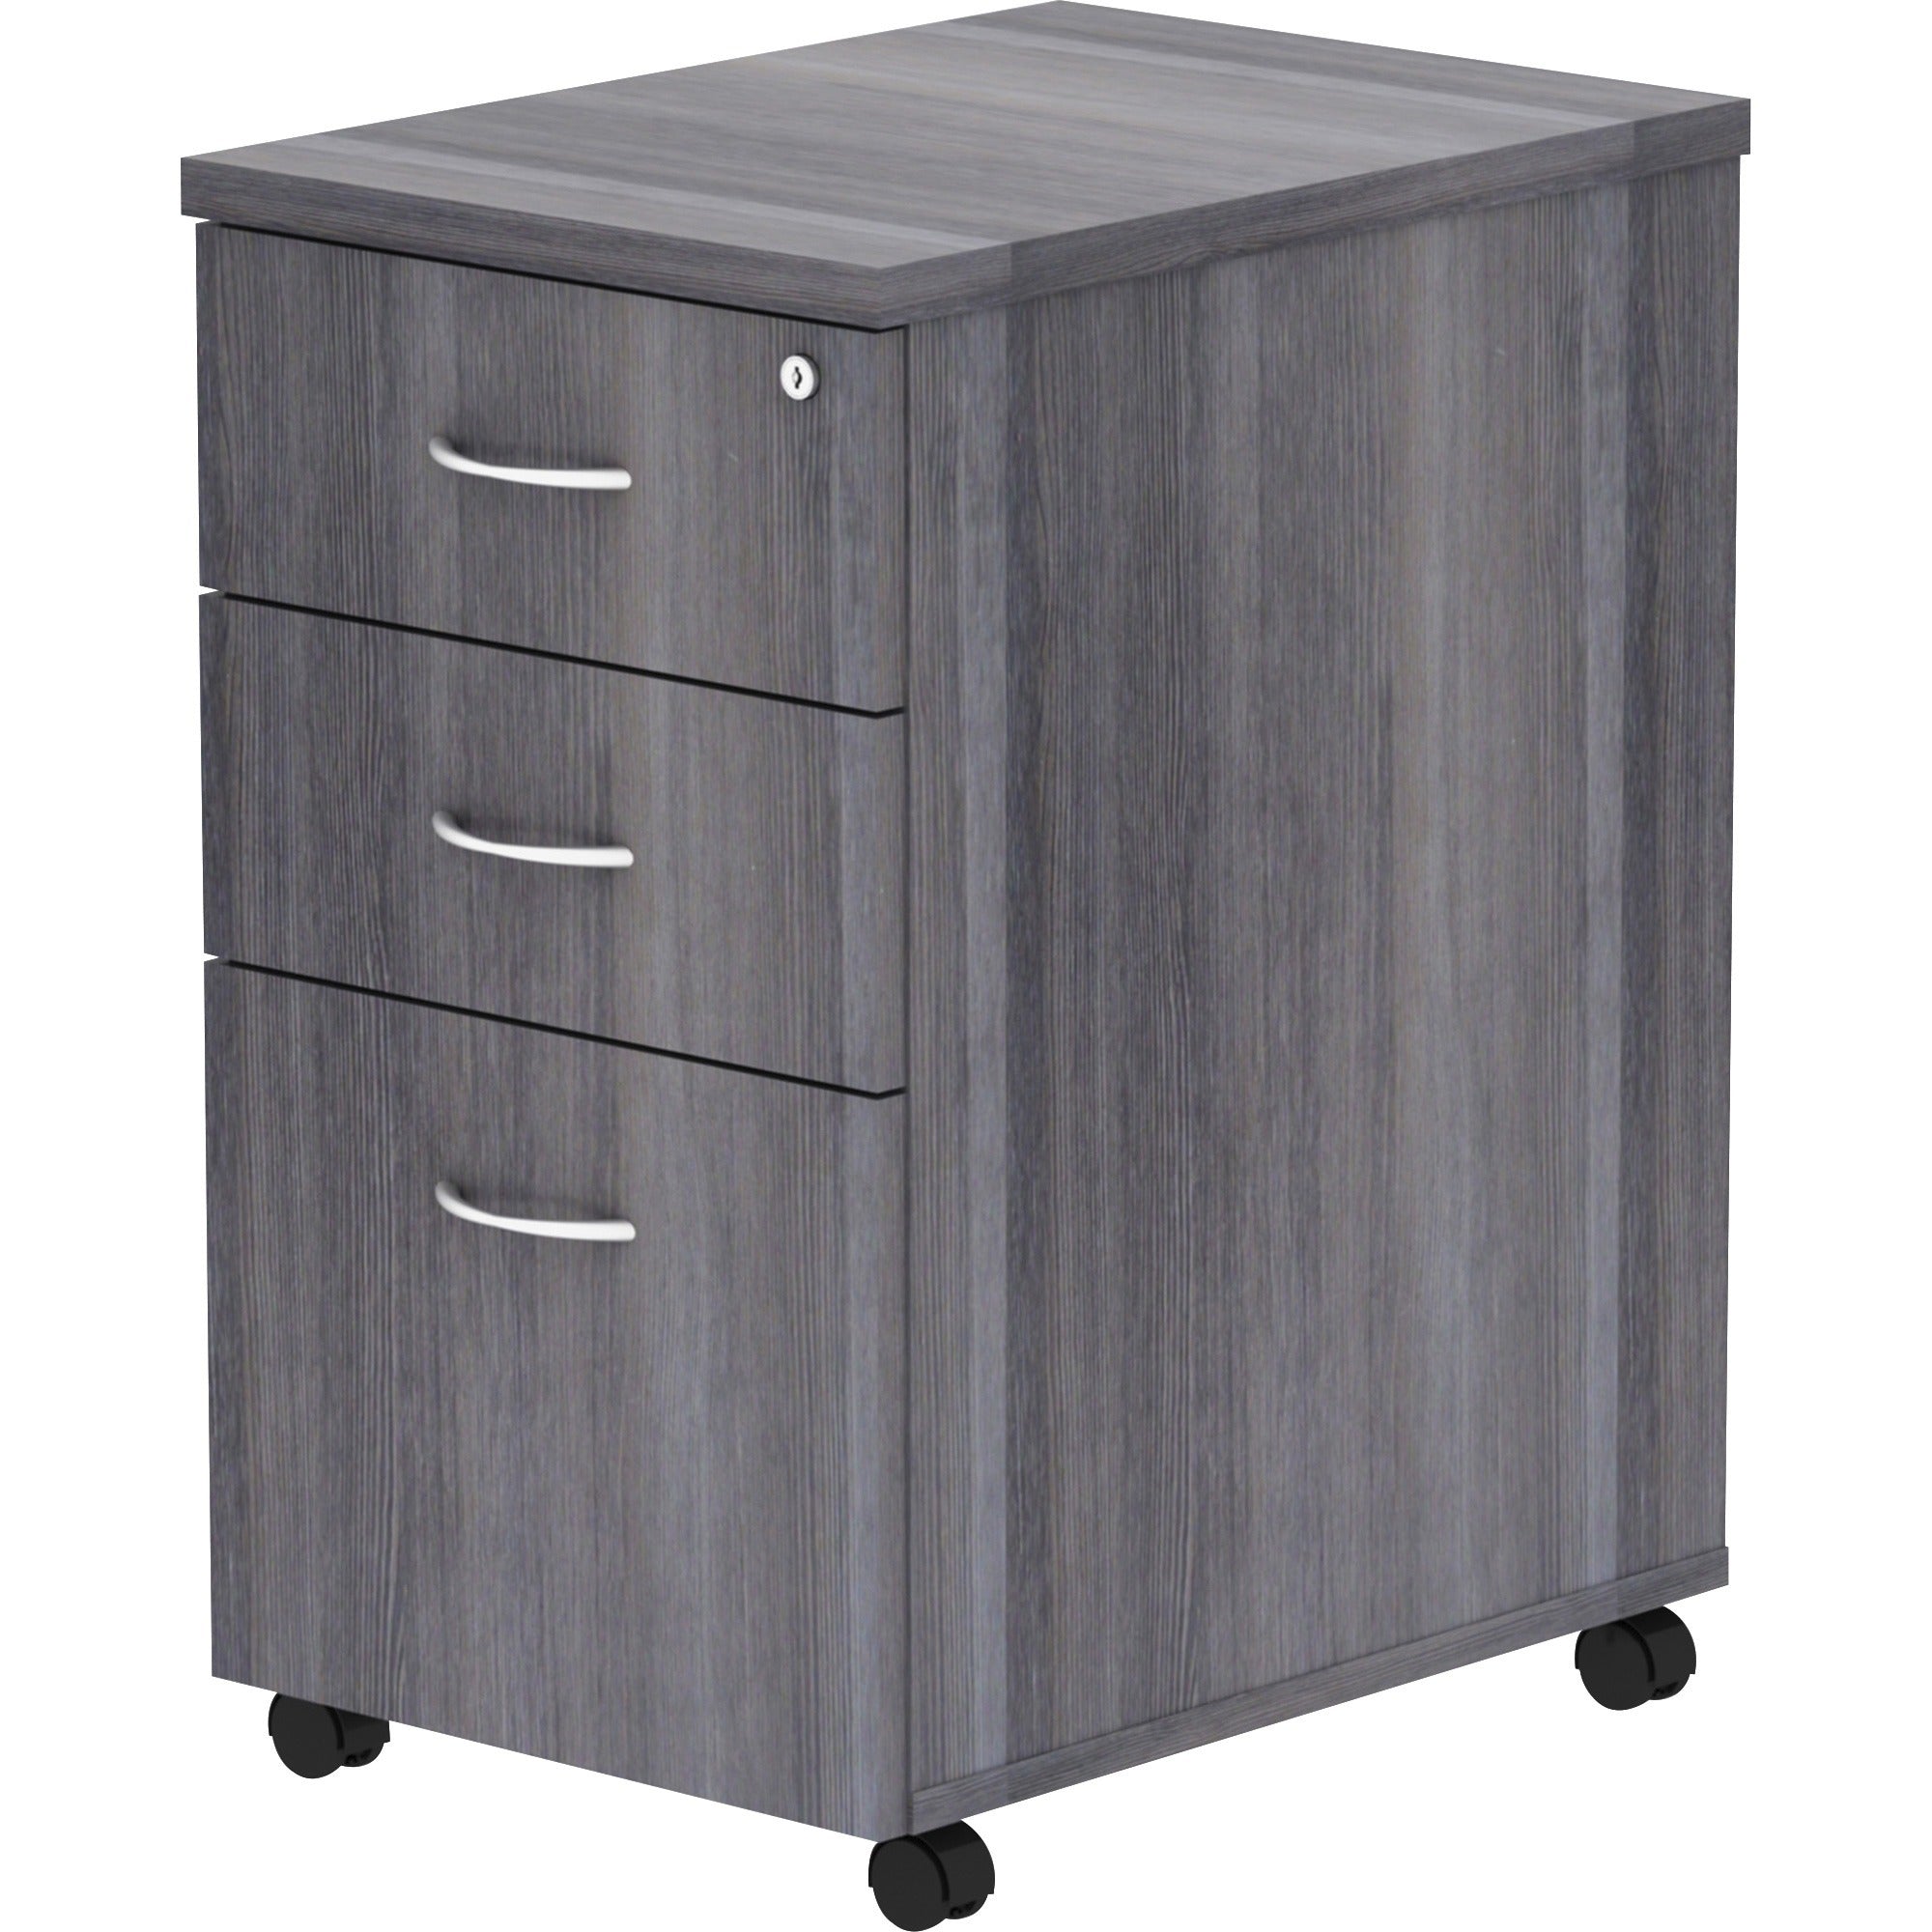 lorell-essentials-series-box-box-file-mobile-file-cabinet-16-x-22283-3-x-box-file-drawers-finish-weathered-charcoal-laminate_llr69560 - 3